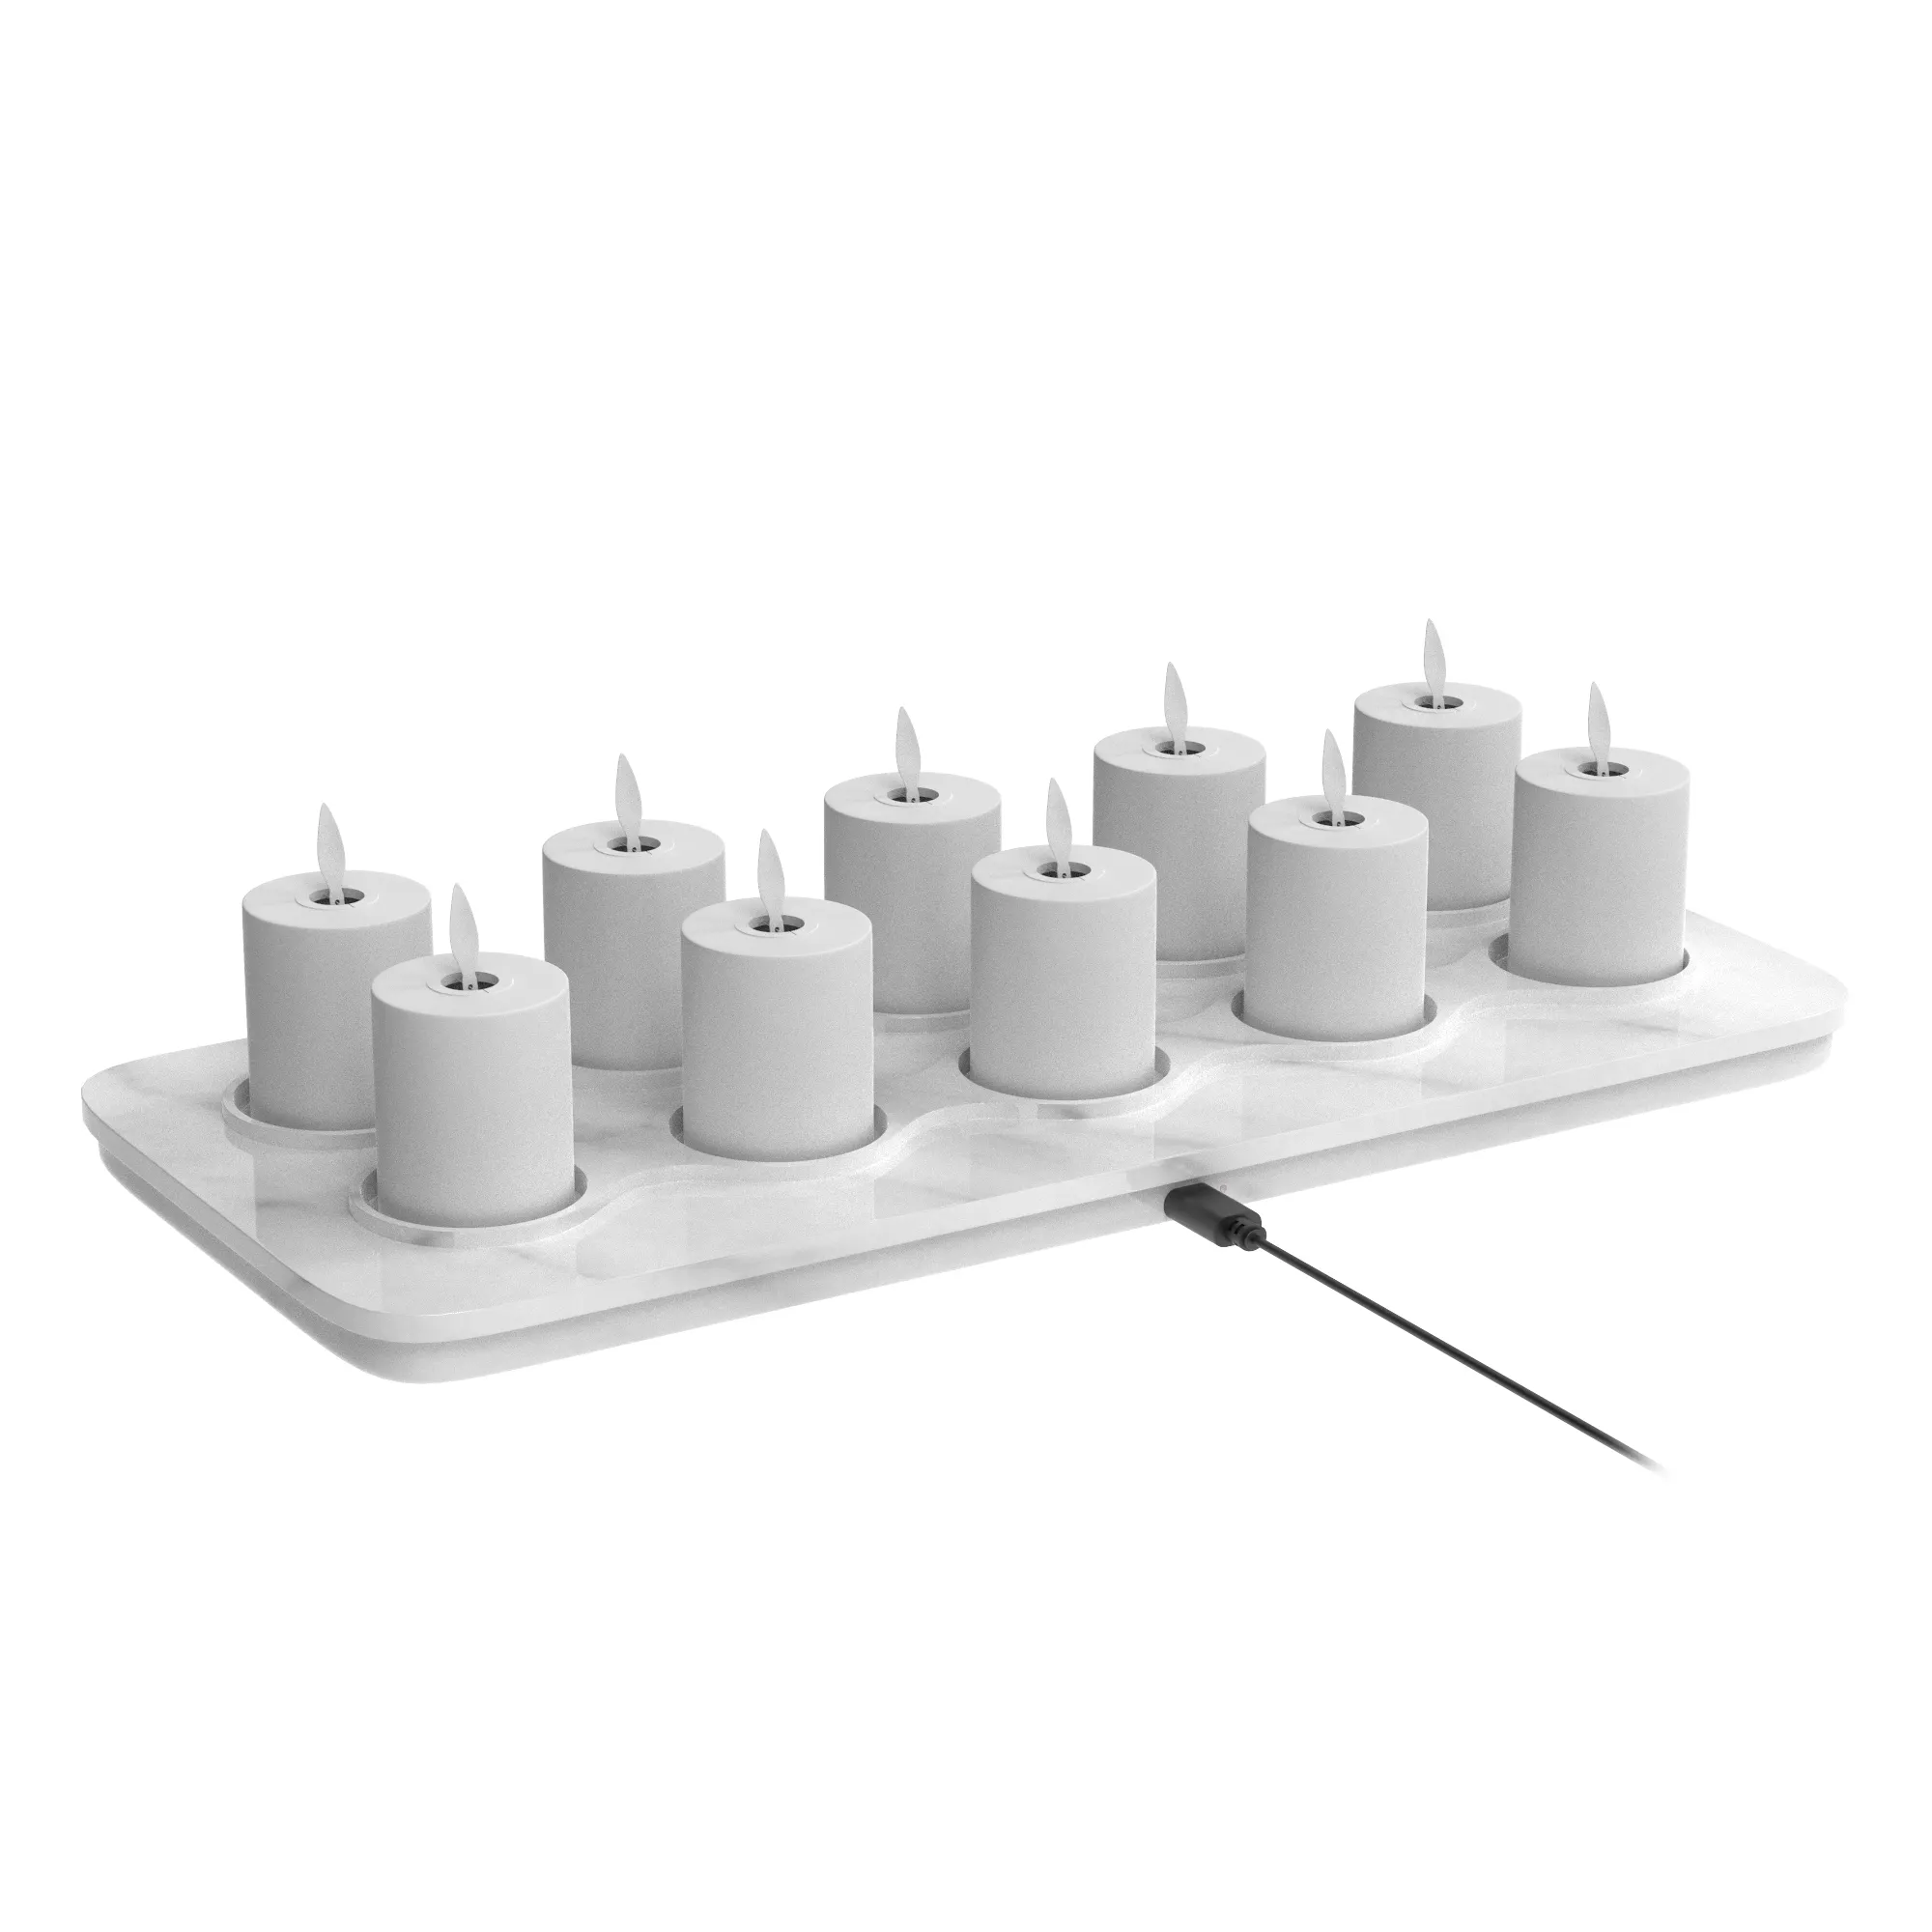 10pcs Smart LED Candle Swing Flame Tealight Rechargeable Candle Flicker Candle Lamp For Home Decoration